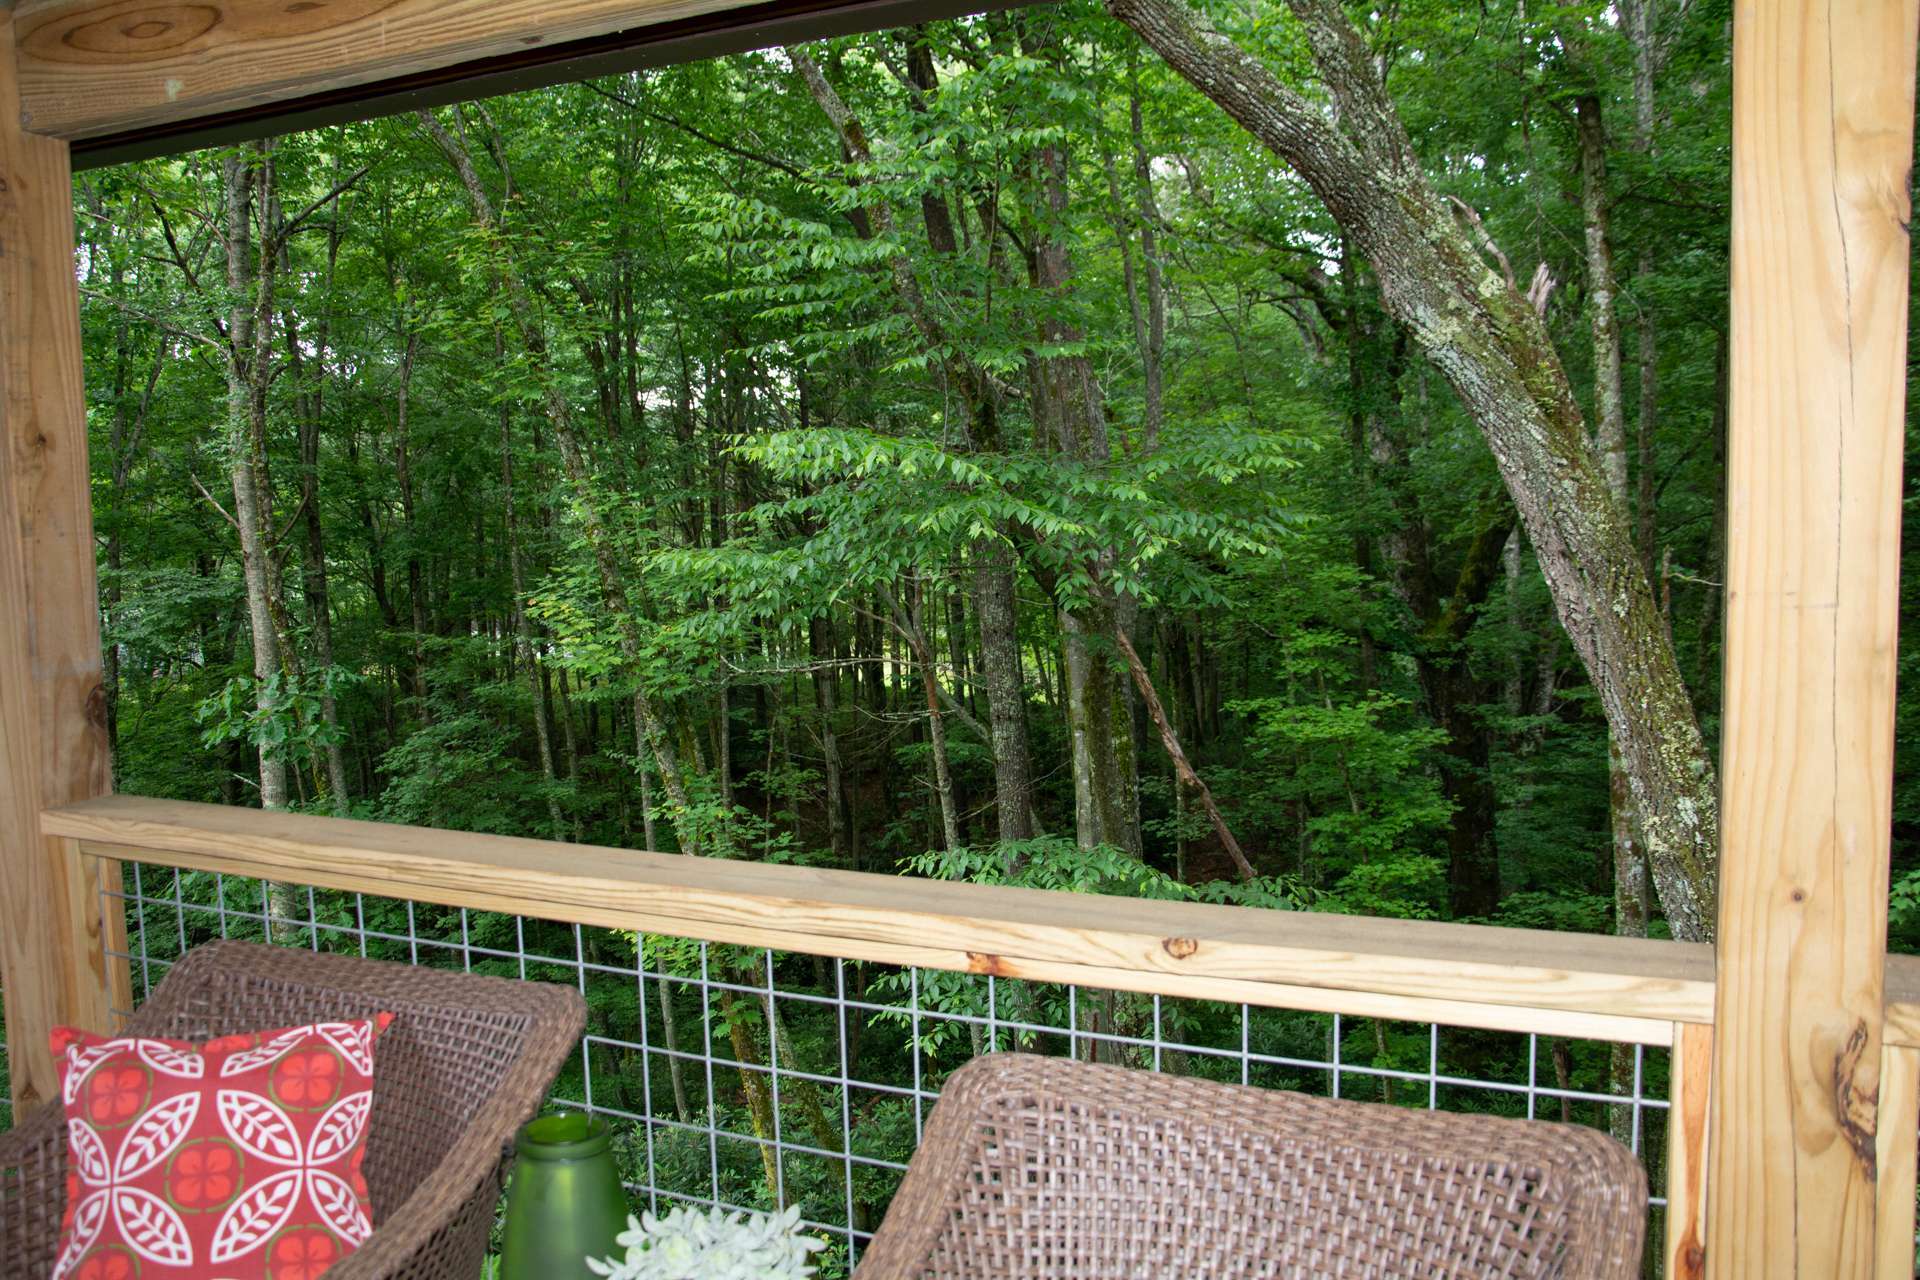 Perfect for your outdoor entertaining, the back deck provides a lovely view of the surrounding forest filled with native hardwoods and rhododendron.